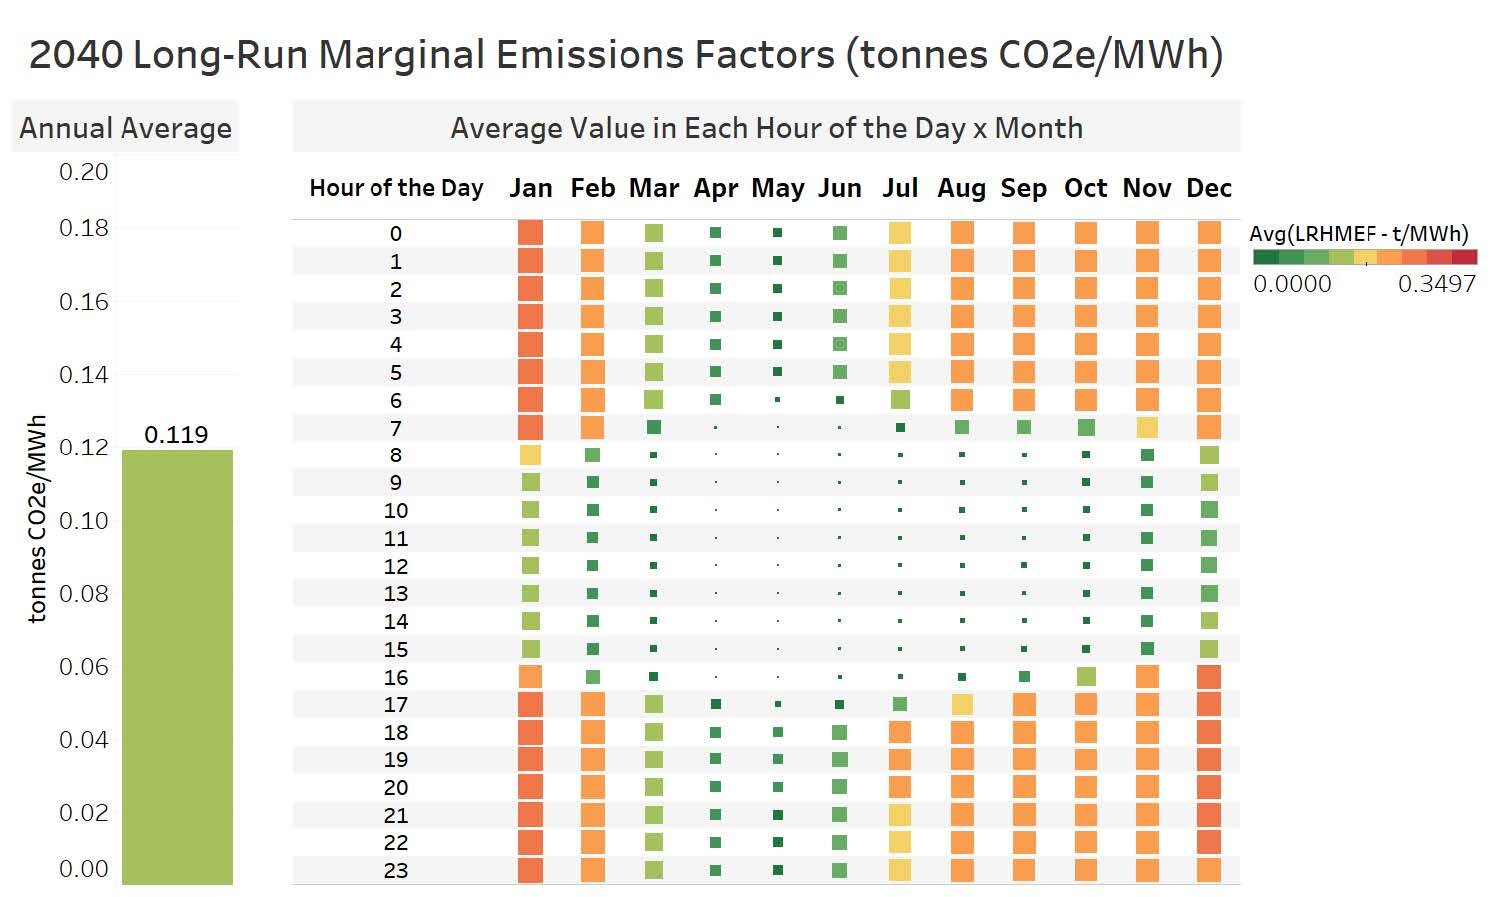  Heat map of emissions factors used for 2040, summarized by the average value in each hour of the day of each month; unweighted annual average shown for reference. 